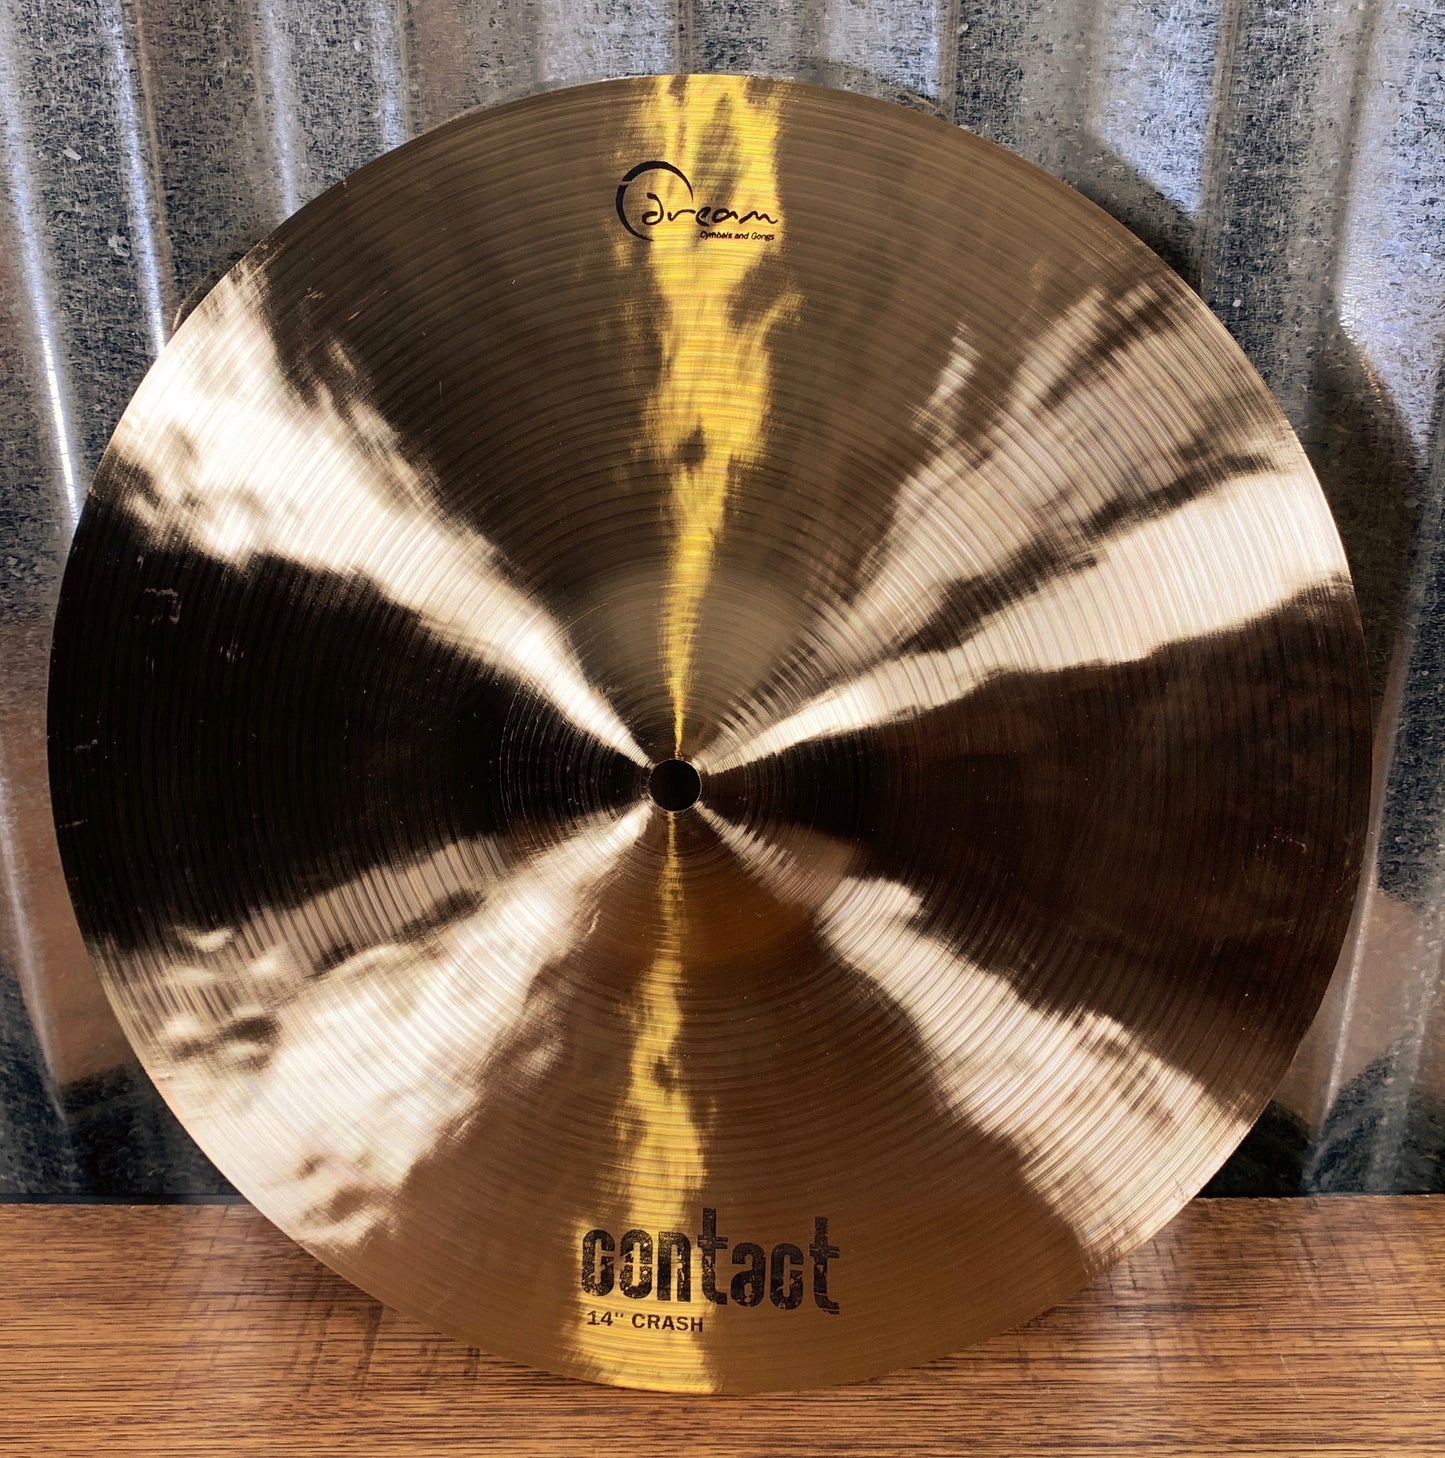 Dream Cymbals C-CR14 Contact Series Hand Forged & Hammered 14" Crash Demo